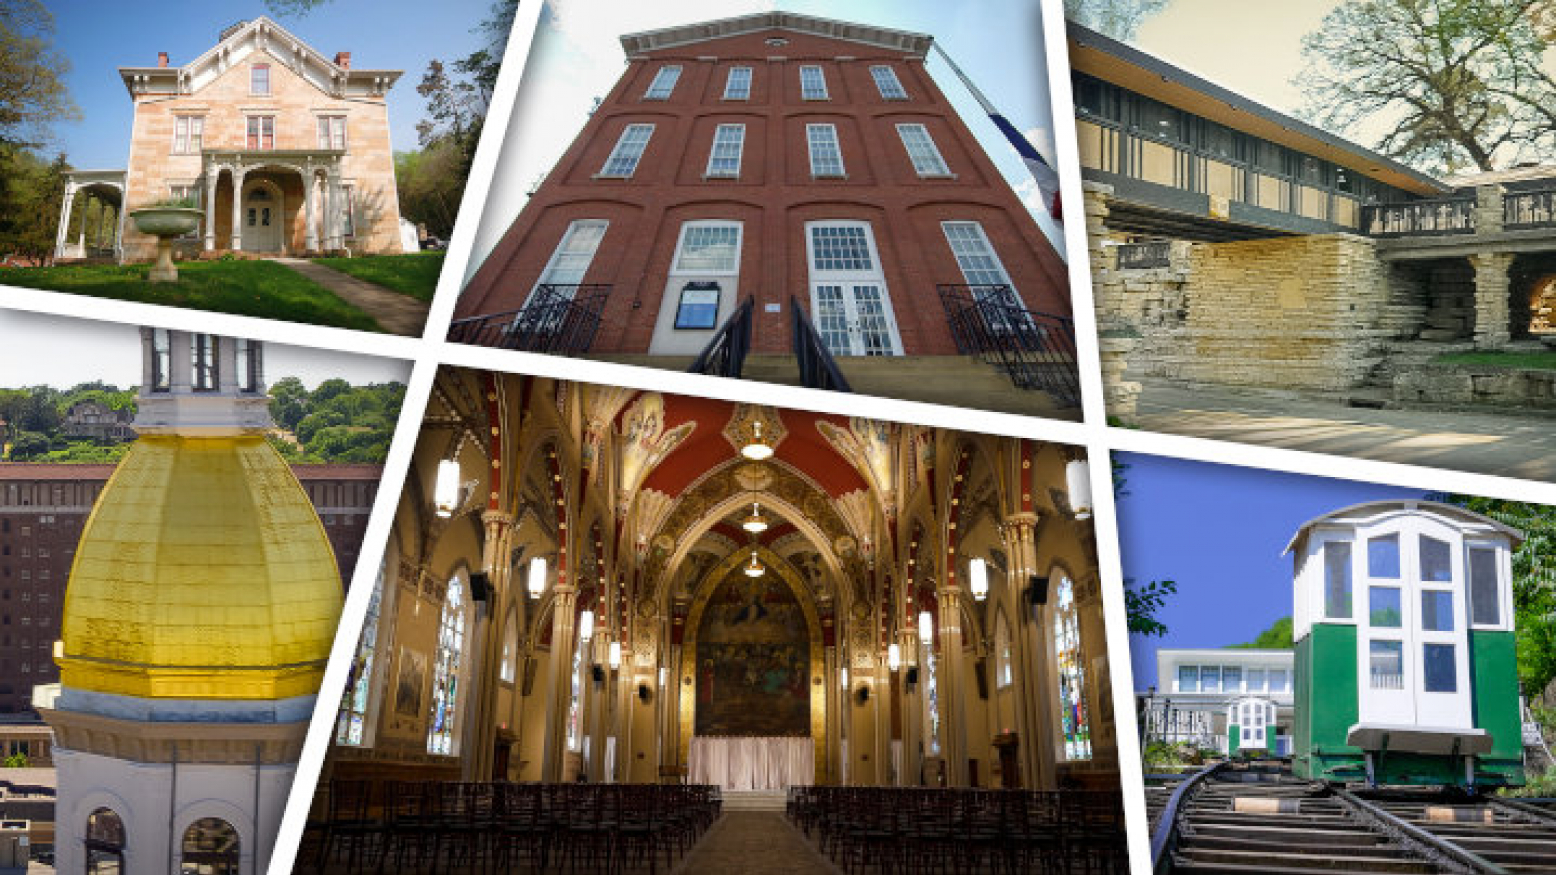 Clockwise from the top left corner: Mathias Ham House, Dubuque City Hall, Eagle Point Park, Fenelon Place Elevator, Steeple Square, Dubuque County Courthouse